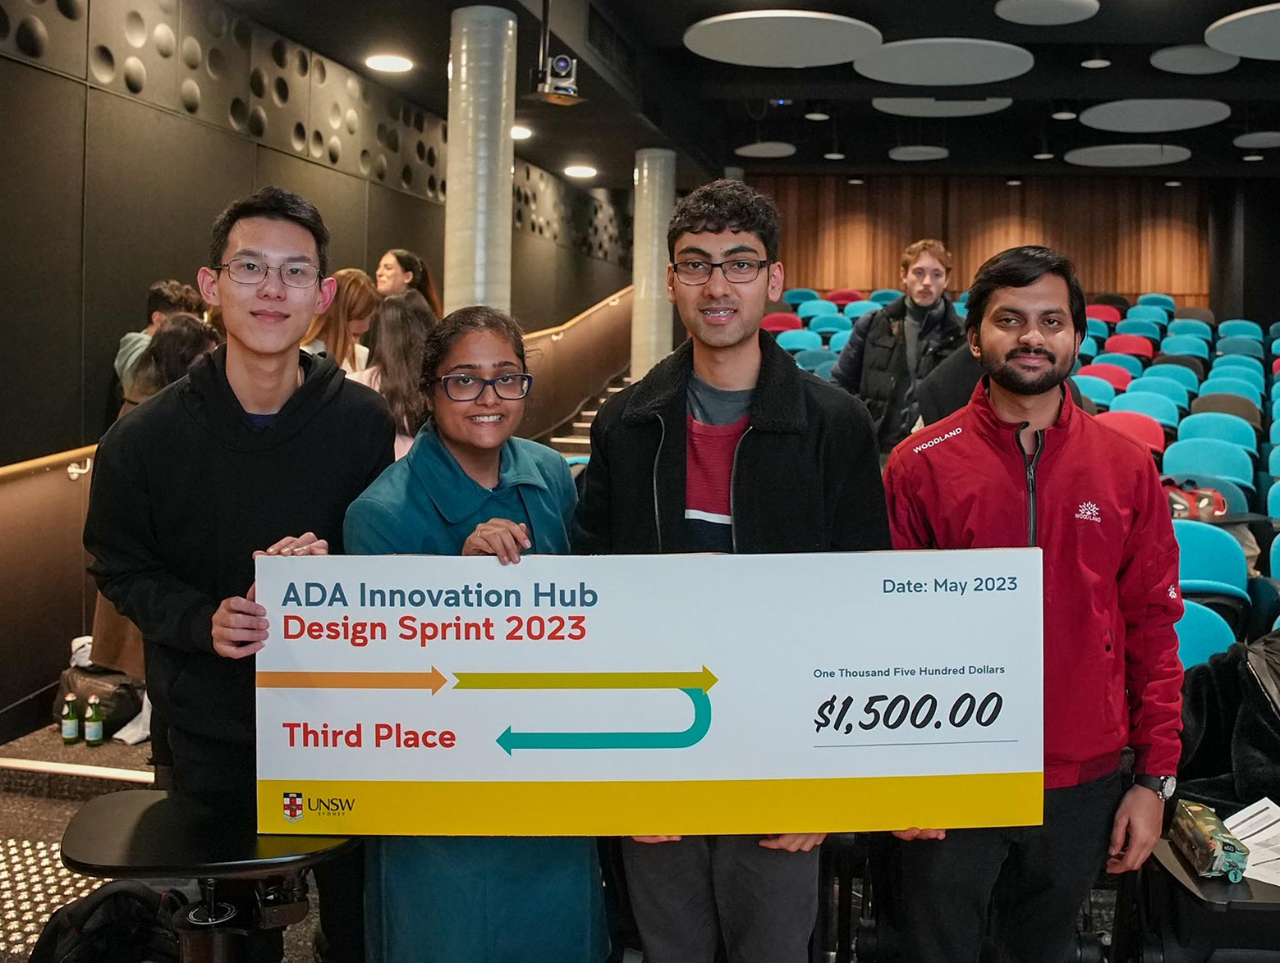 Third place winning team from ADA Innovation Hub Design Sprint 2023 hold giant novelty cheque